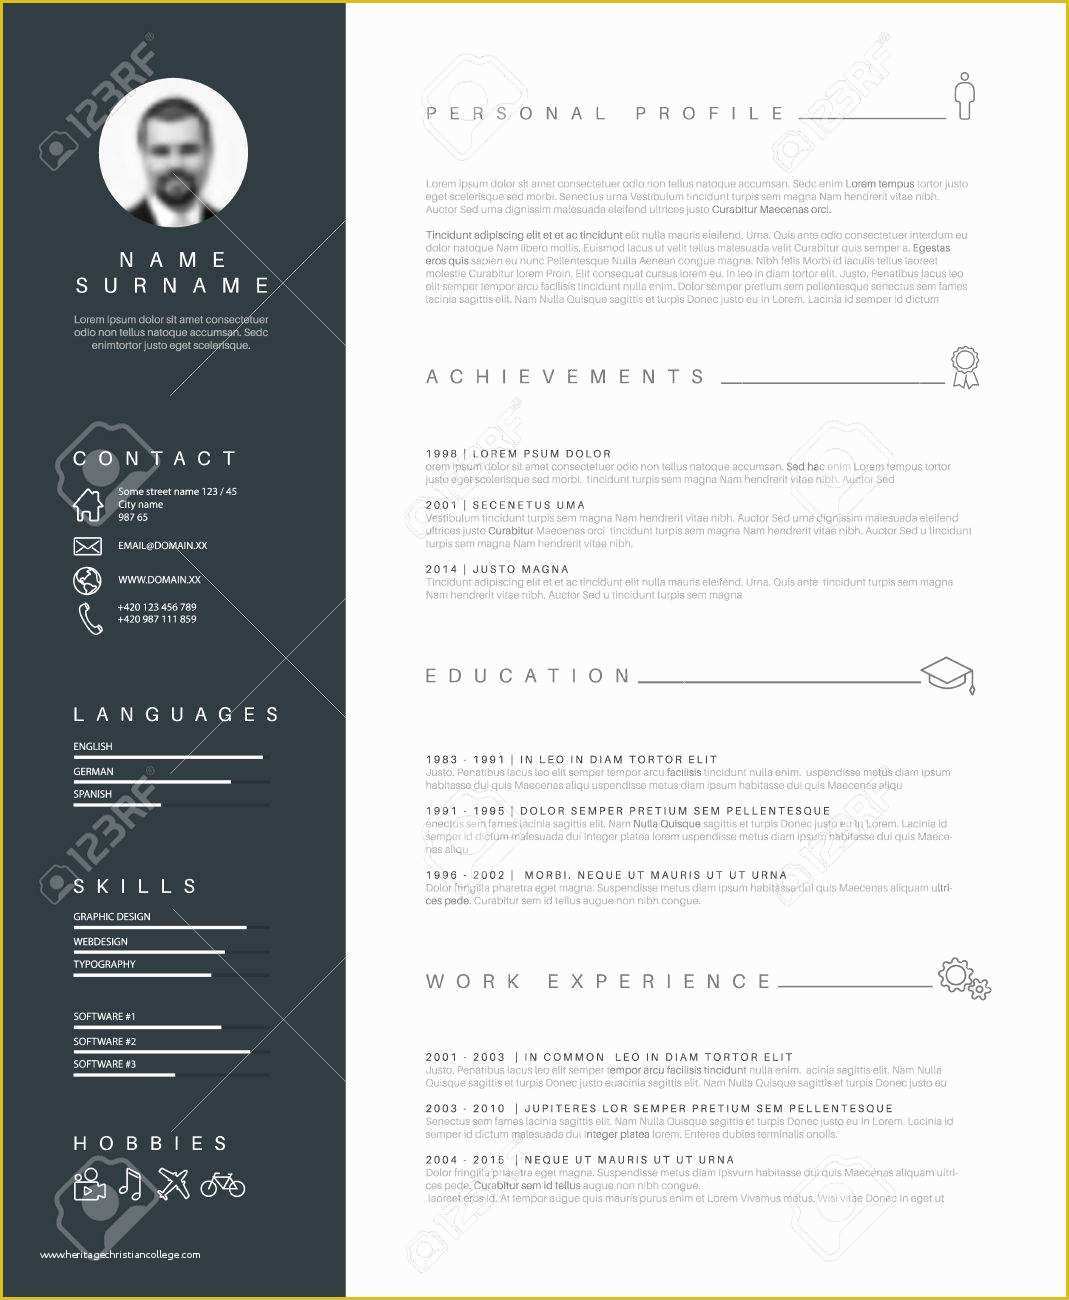 Minimalist Resume Template Free Download Of Resume and Template 45 Free Minimalist Resume Template